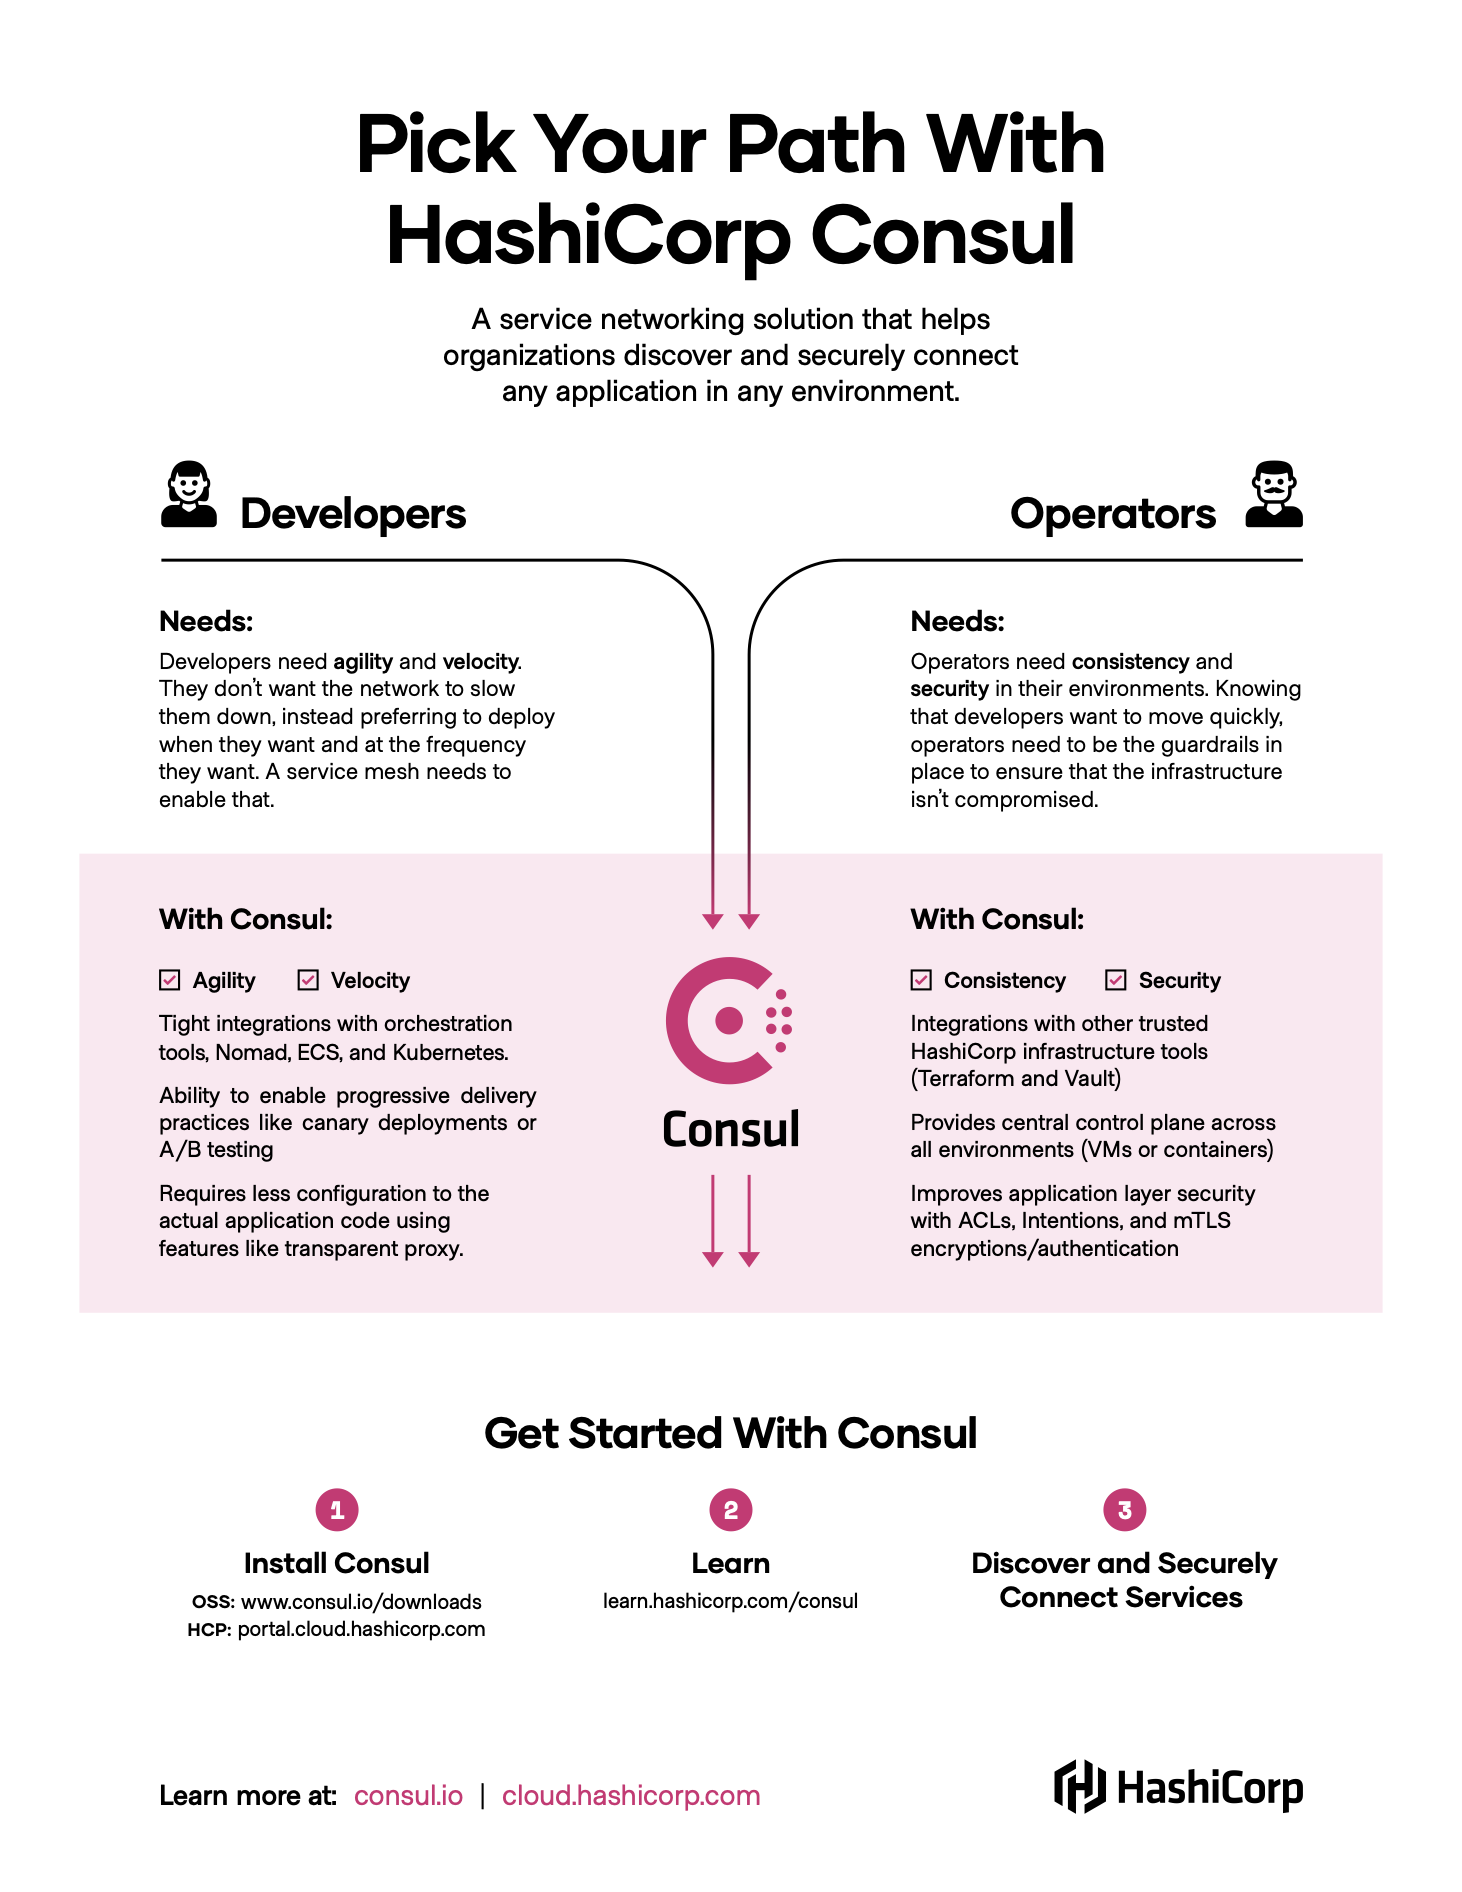 The Consul Pick Your Path infographic explaining the needs of developer and operators and how Consul helps with each.